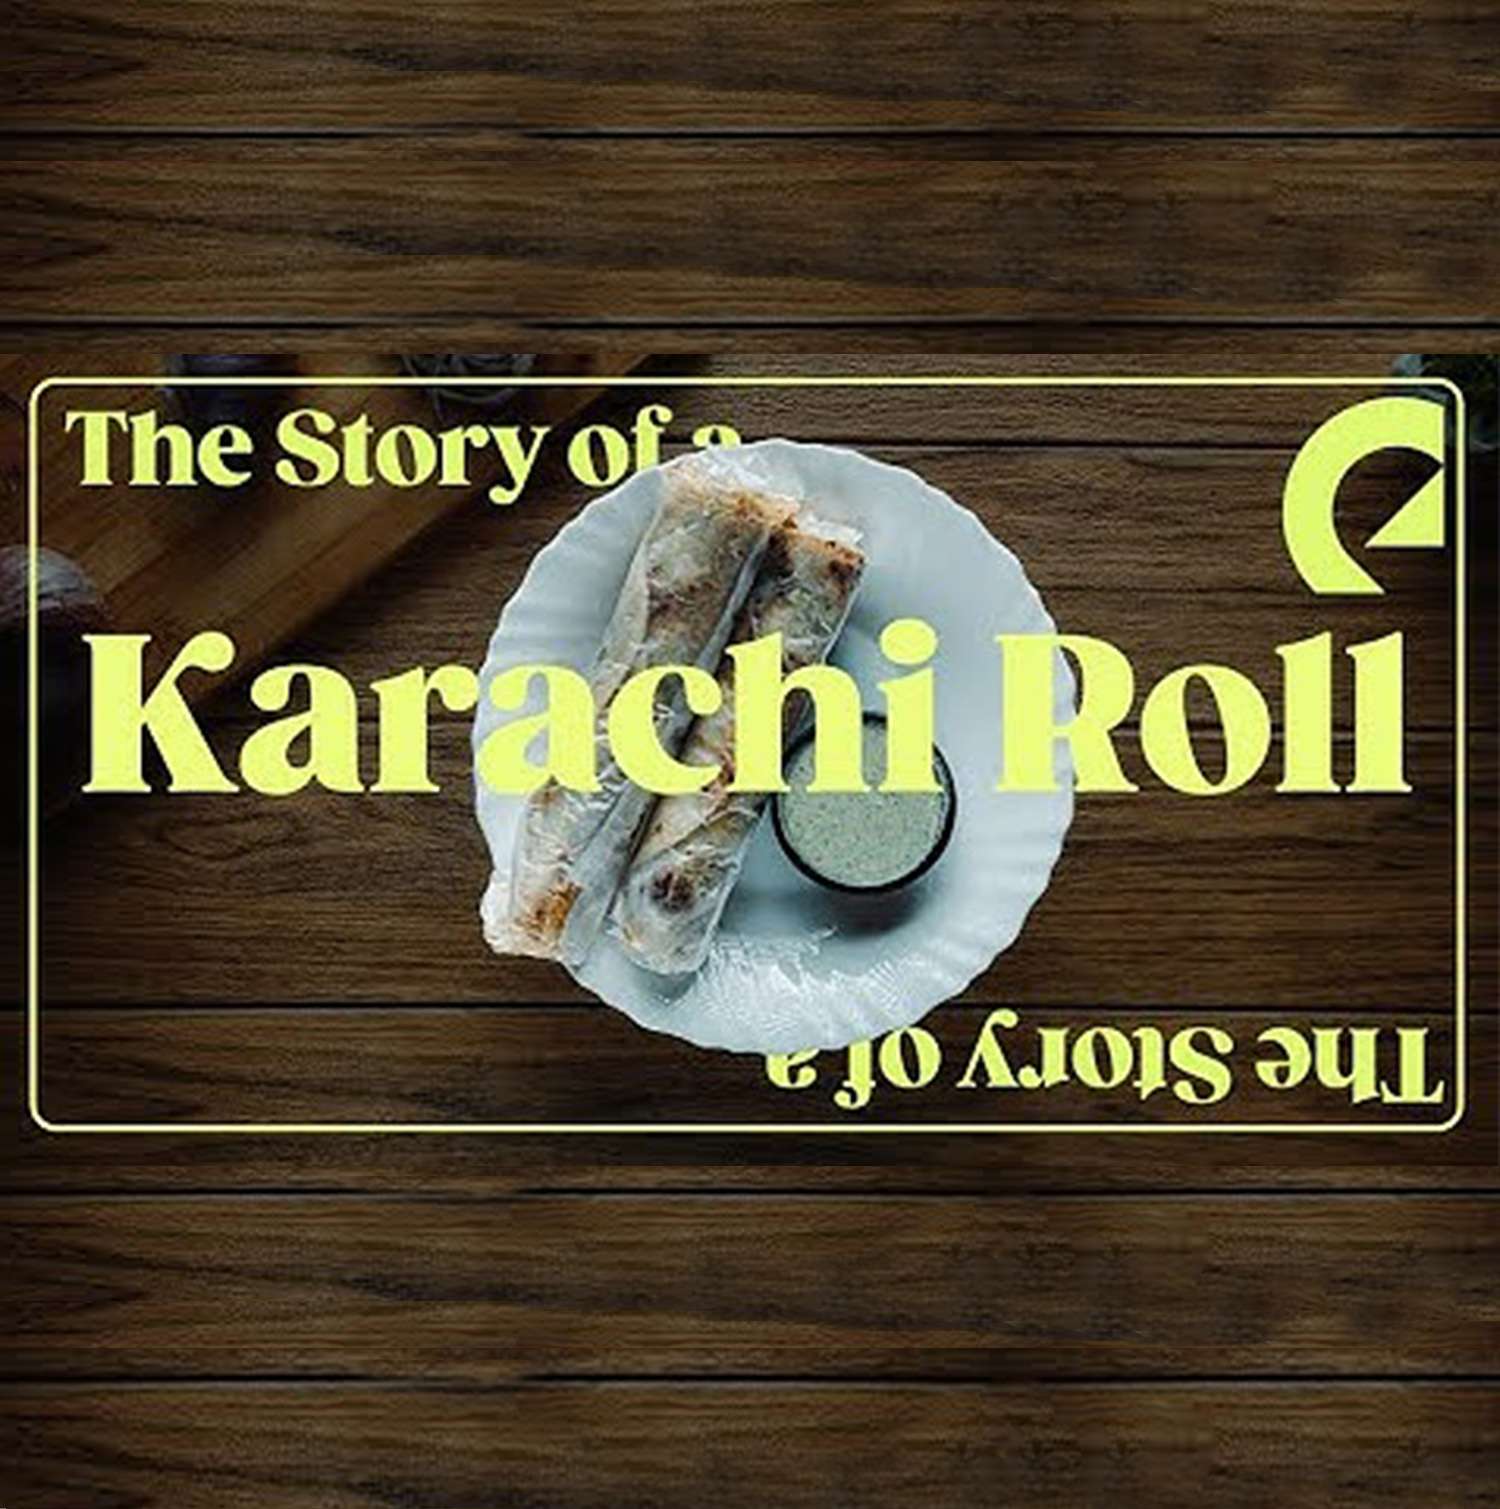 The Story of the Karachi Roll - enthucutlet